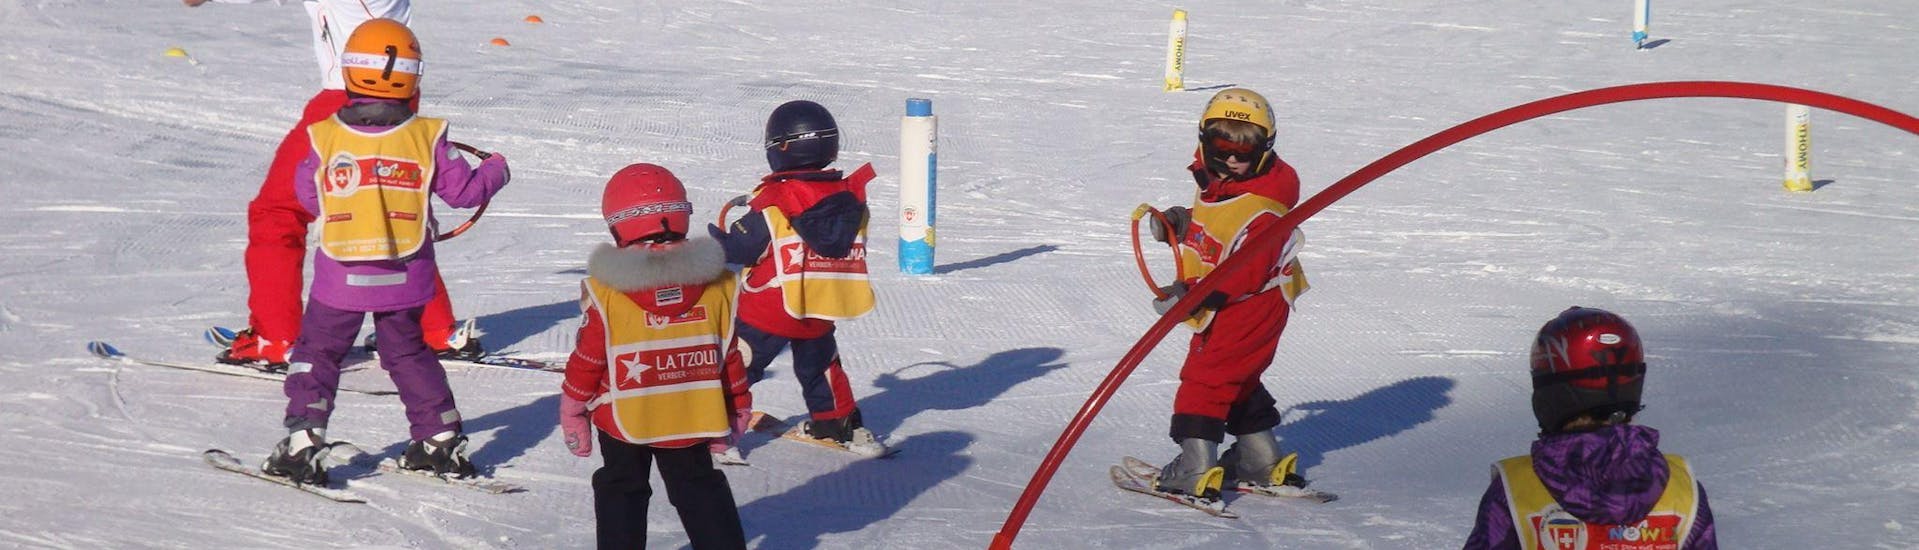 Kids are learning the basics of skiing thanks to games in the safety of the snowgarden during their Kids Ski Lessons "Snowgarden" (3-6 years) - Morning with the Swiss Ski School La Tzoumaz.